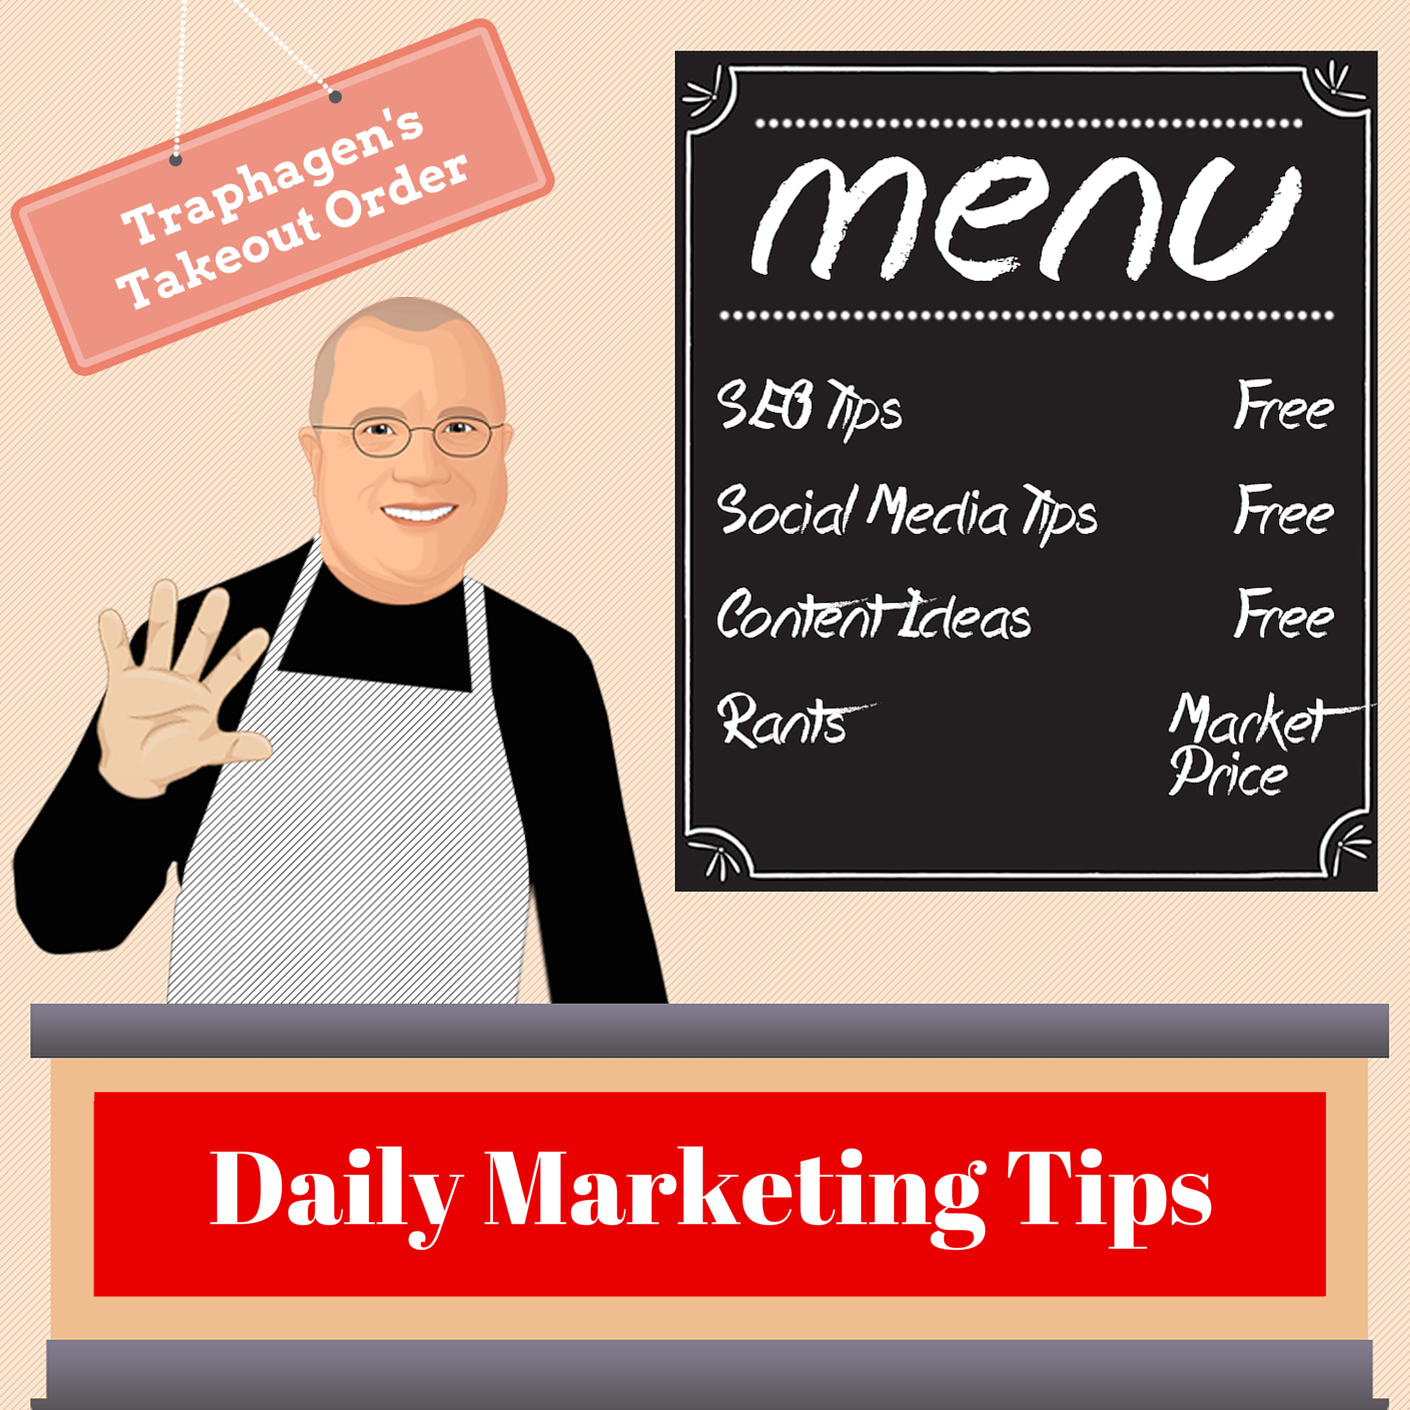 Traphagen's Takeout Order Marketing Podcast